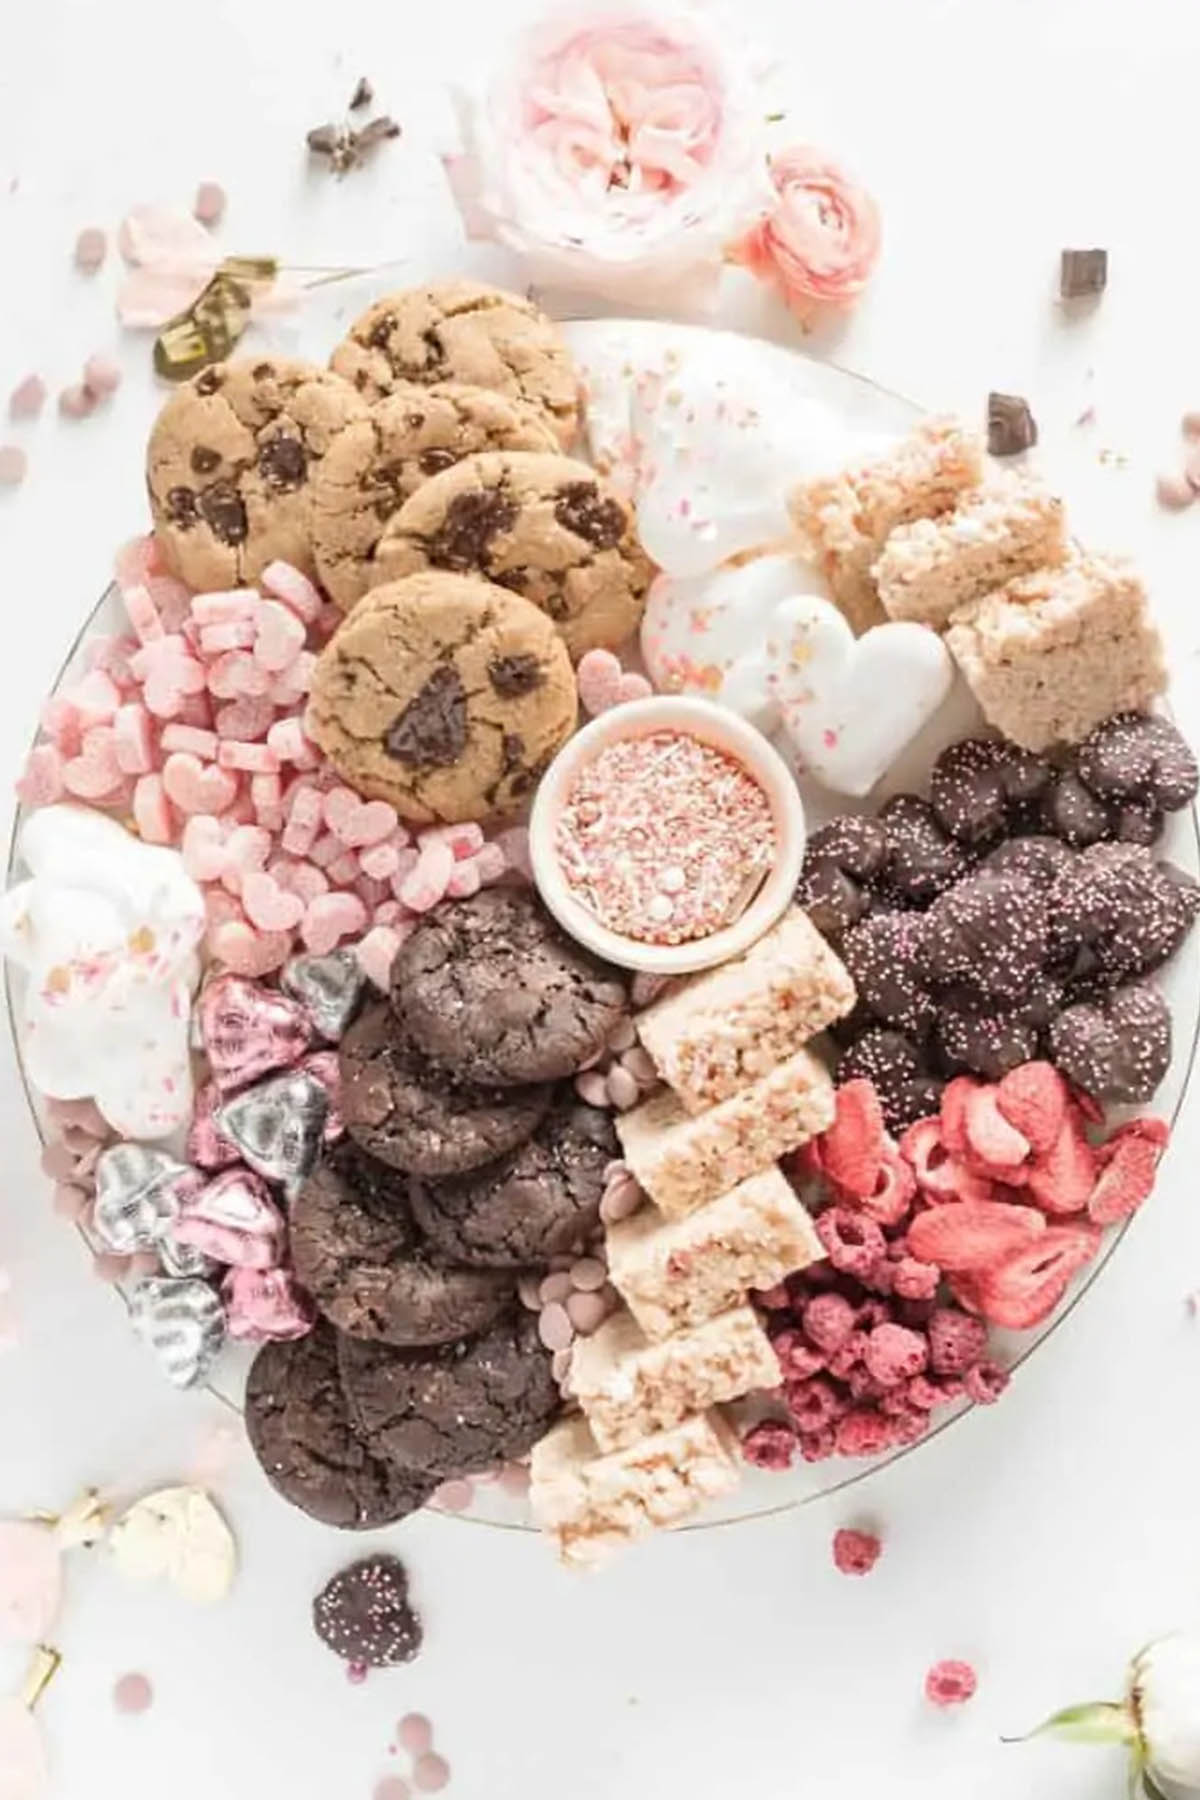 large serving platter filled with cookies, rice krispie treats, and candies.